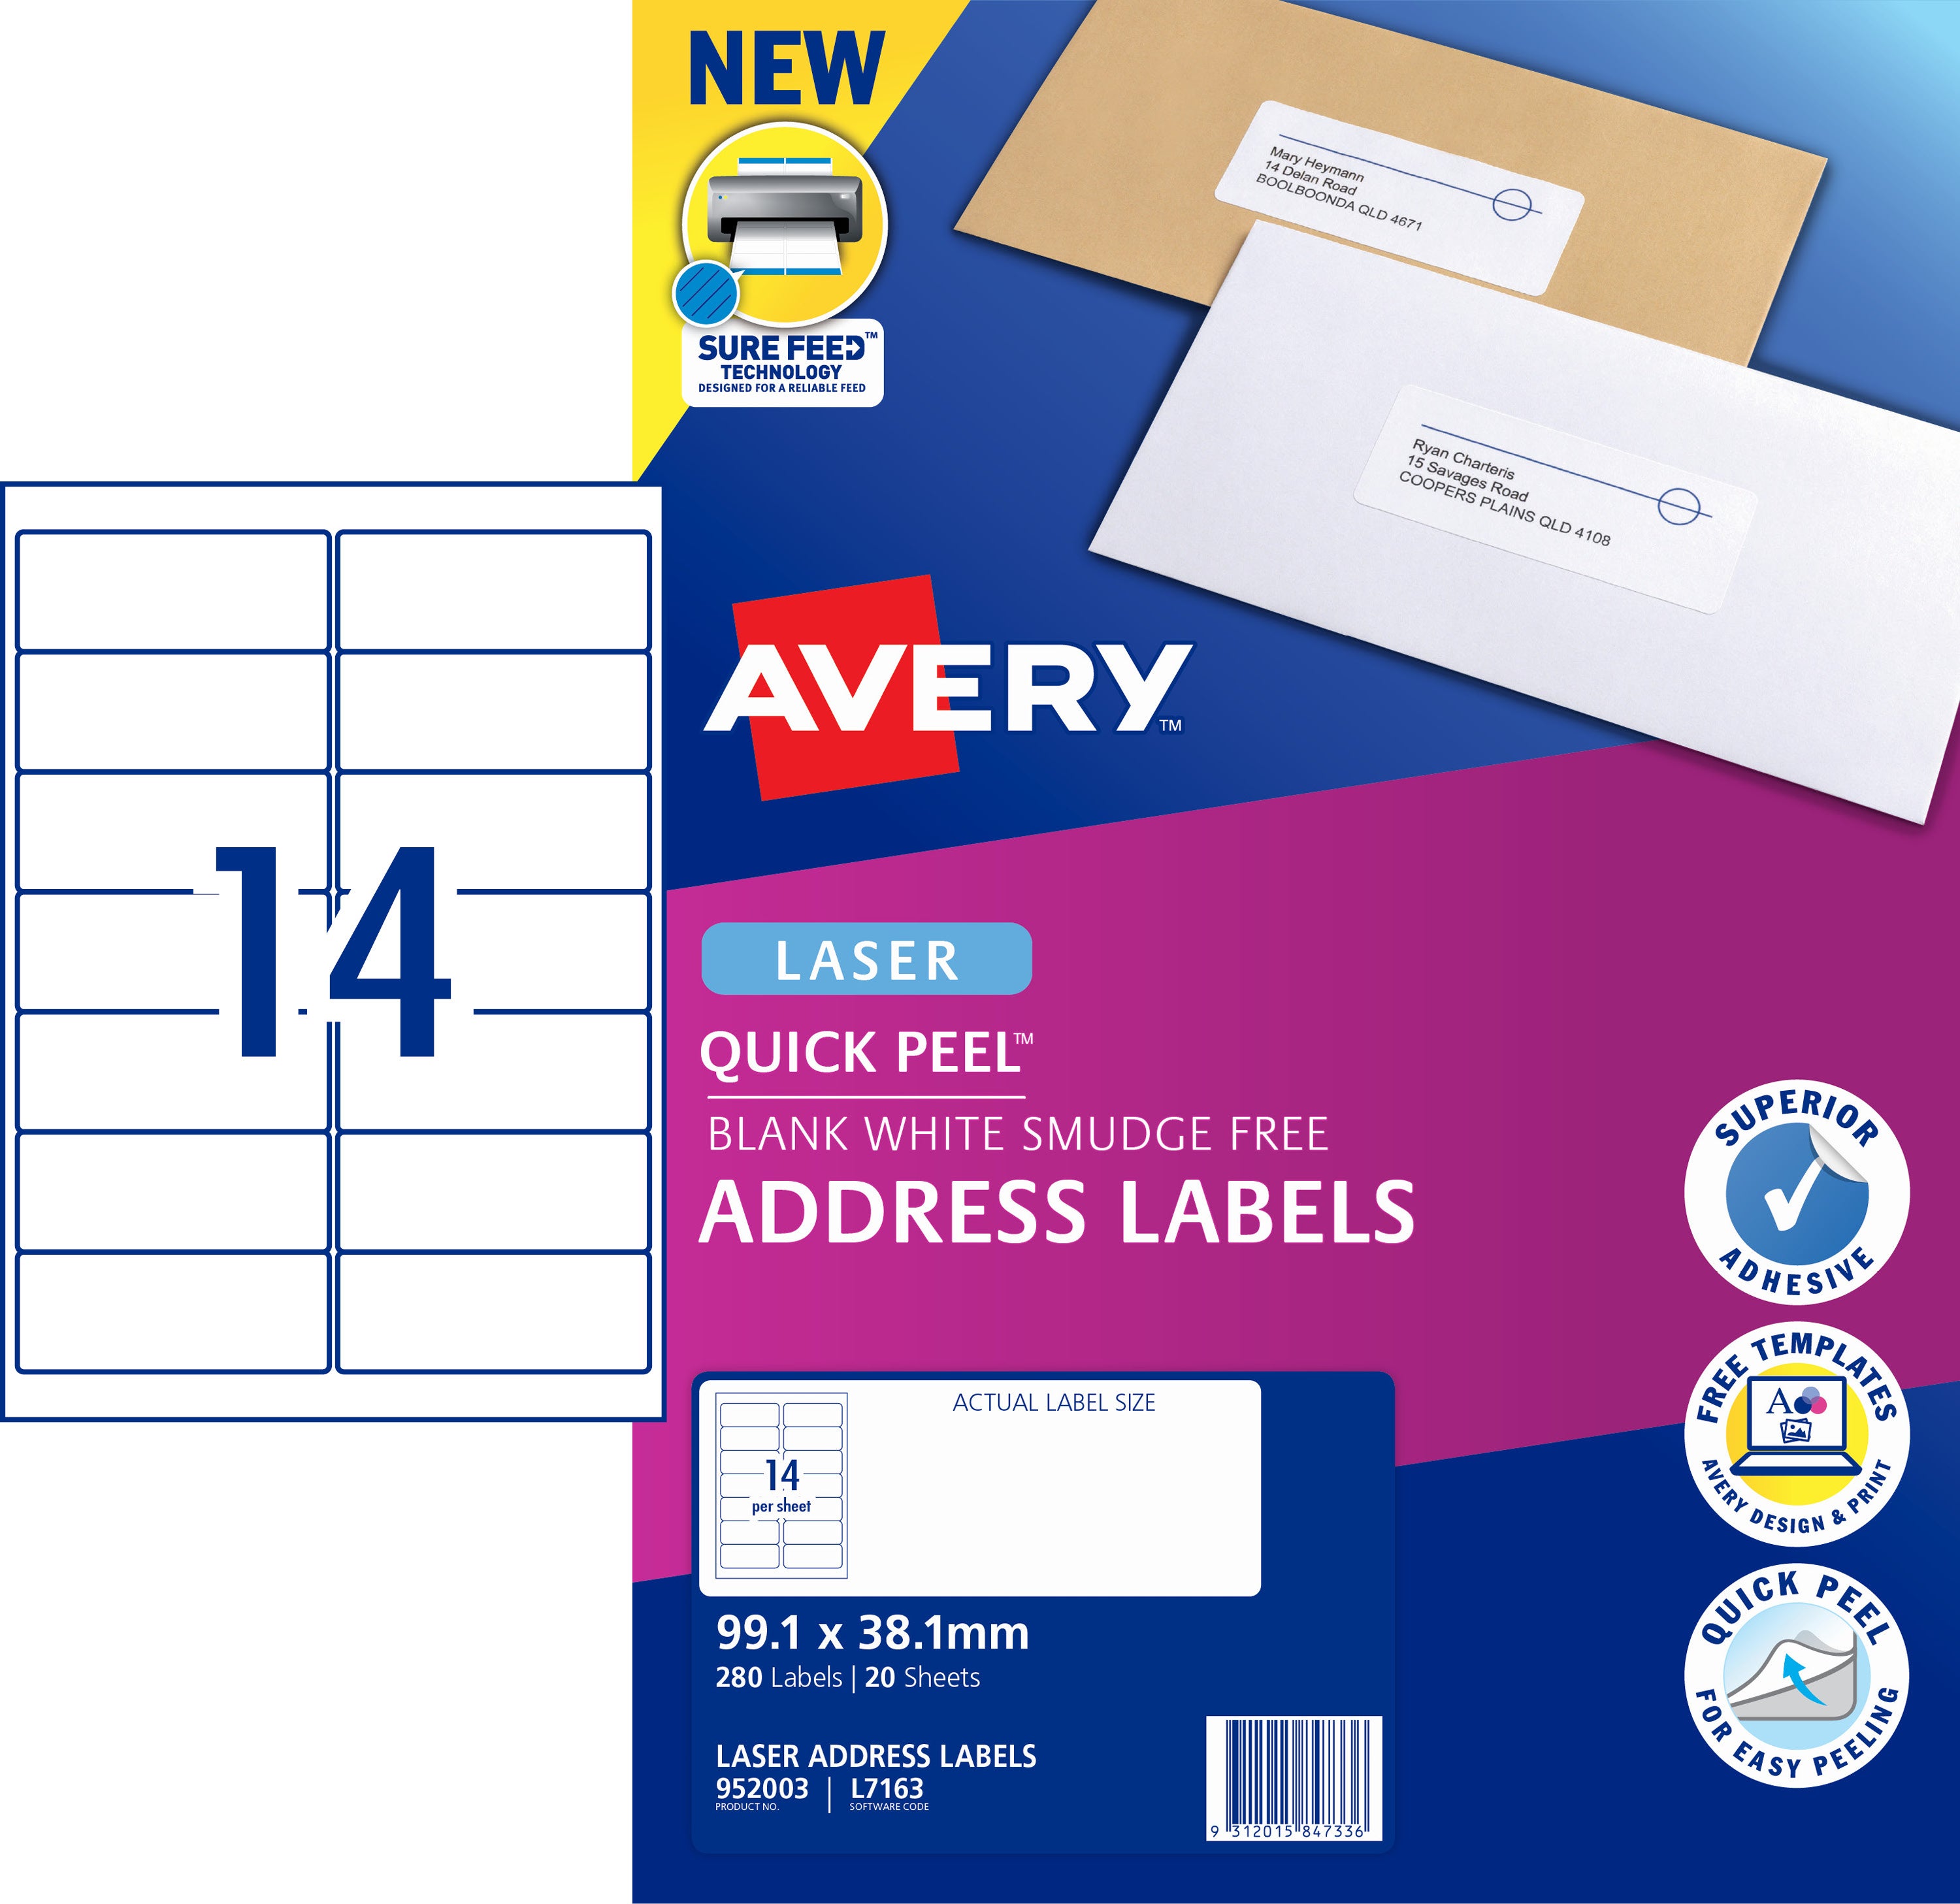 AVERY L6035-20 YELLOW LASER LABELS 24 PER SHEET GENUINE BRANDED-BRAND NEW Â© 